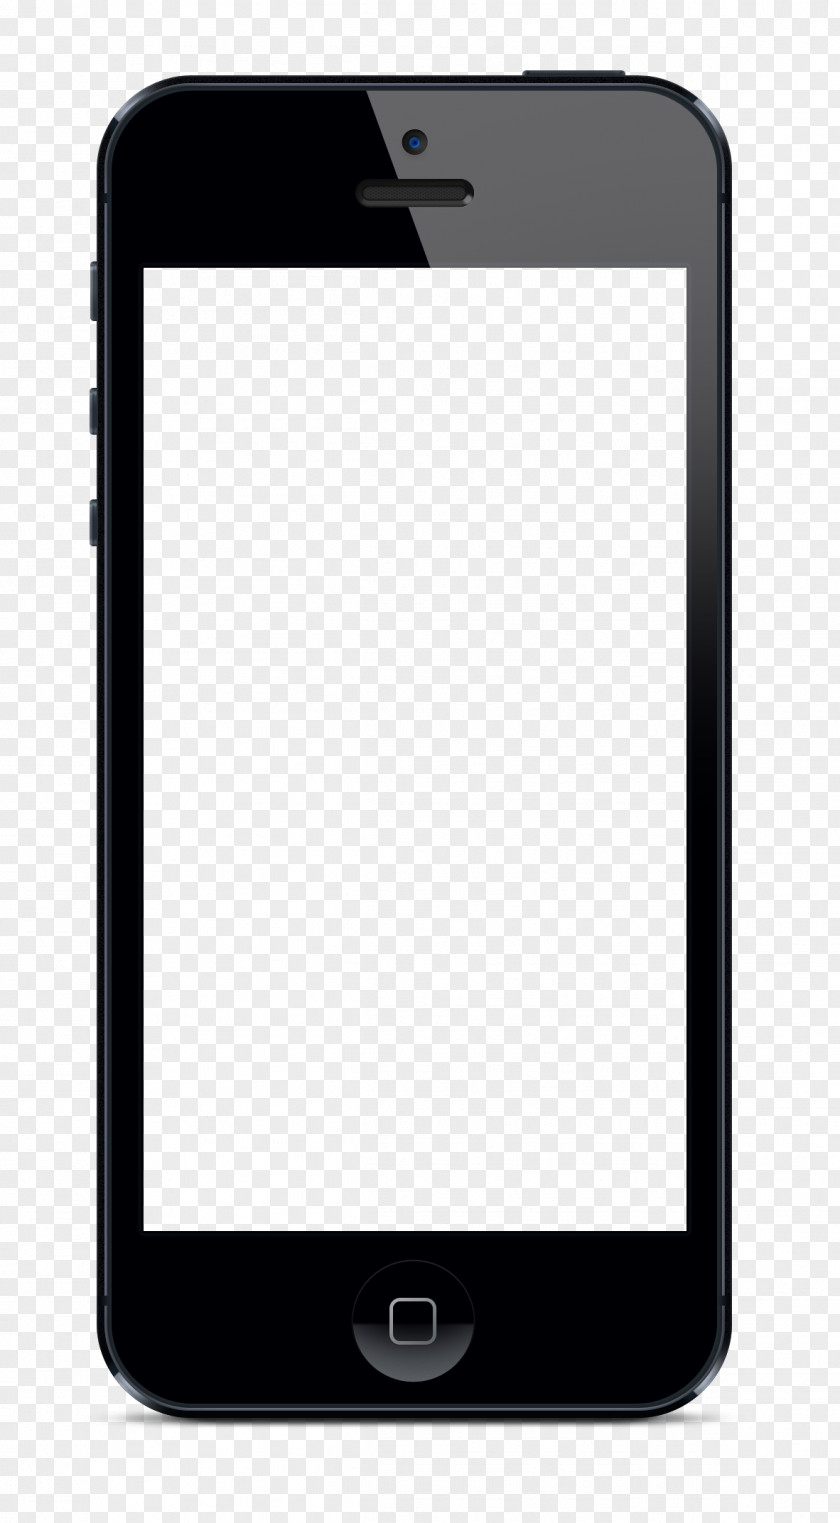 Apple Iphone Transparent Image IPhone 5 IOS Mobile App Store PNG